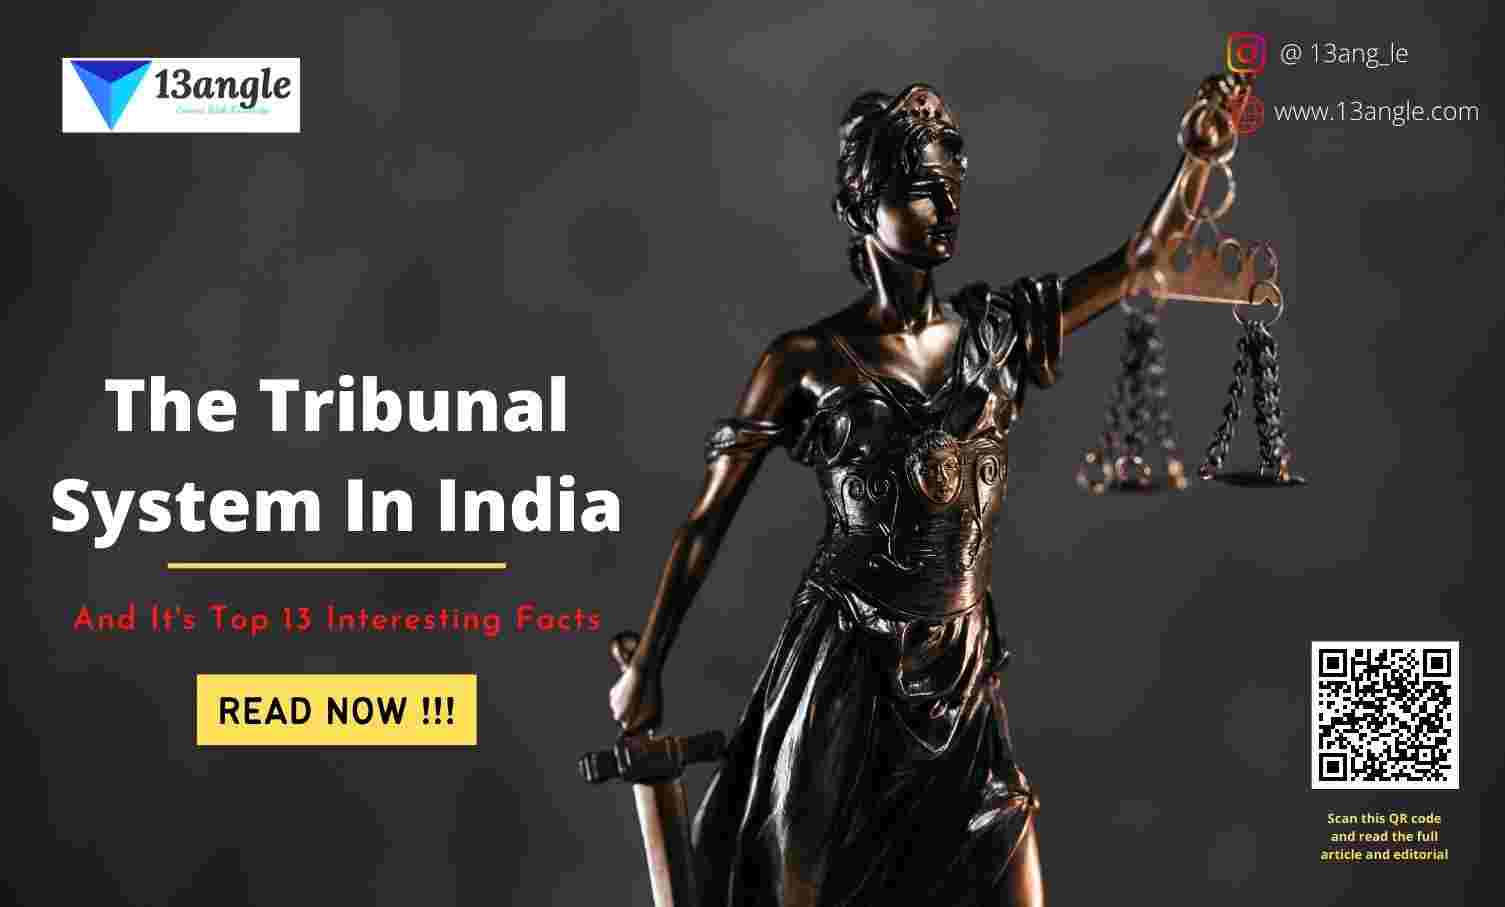 The Tribunal System In India- 13angle.com